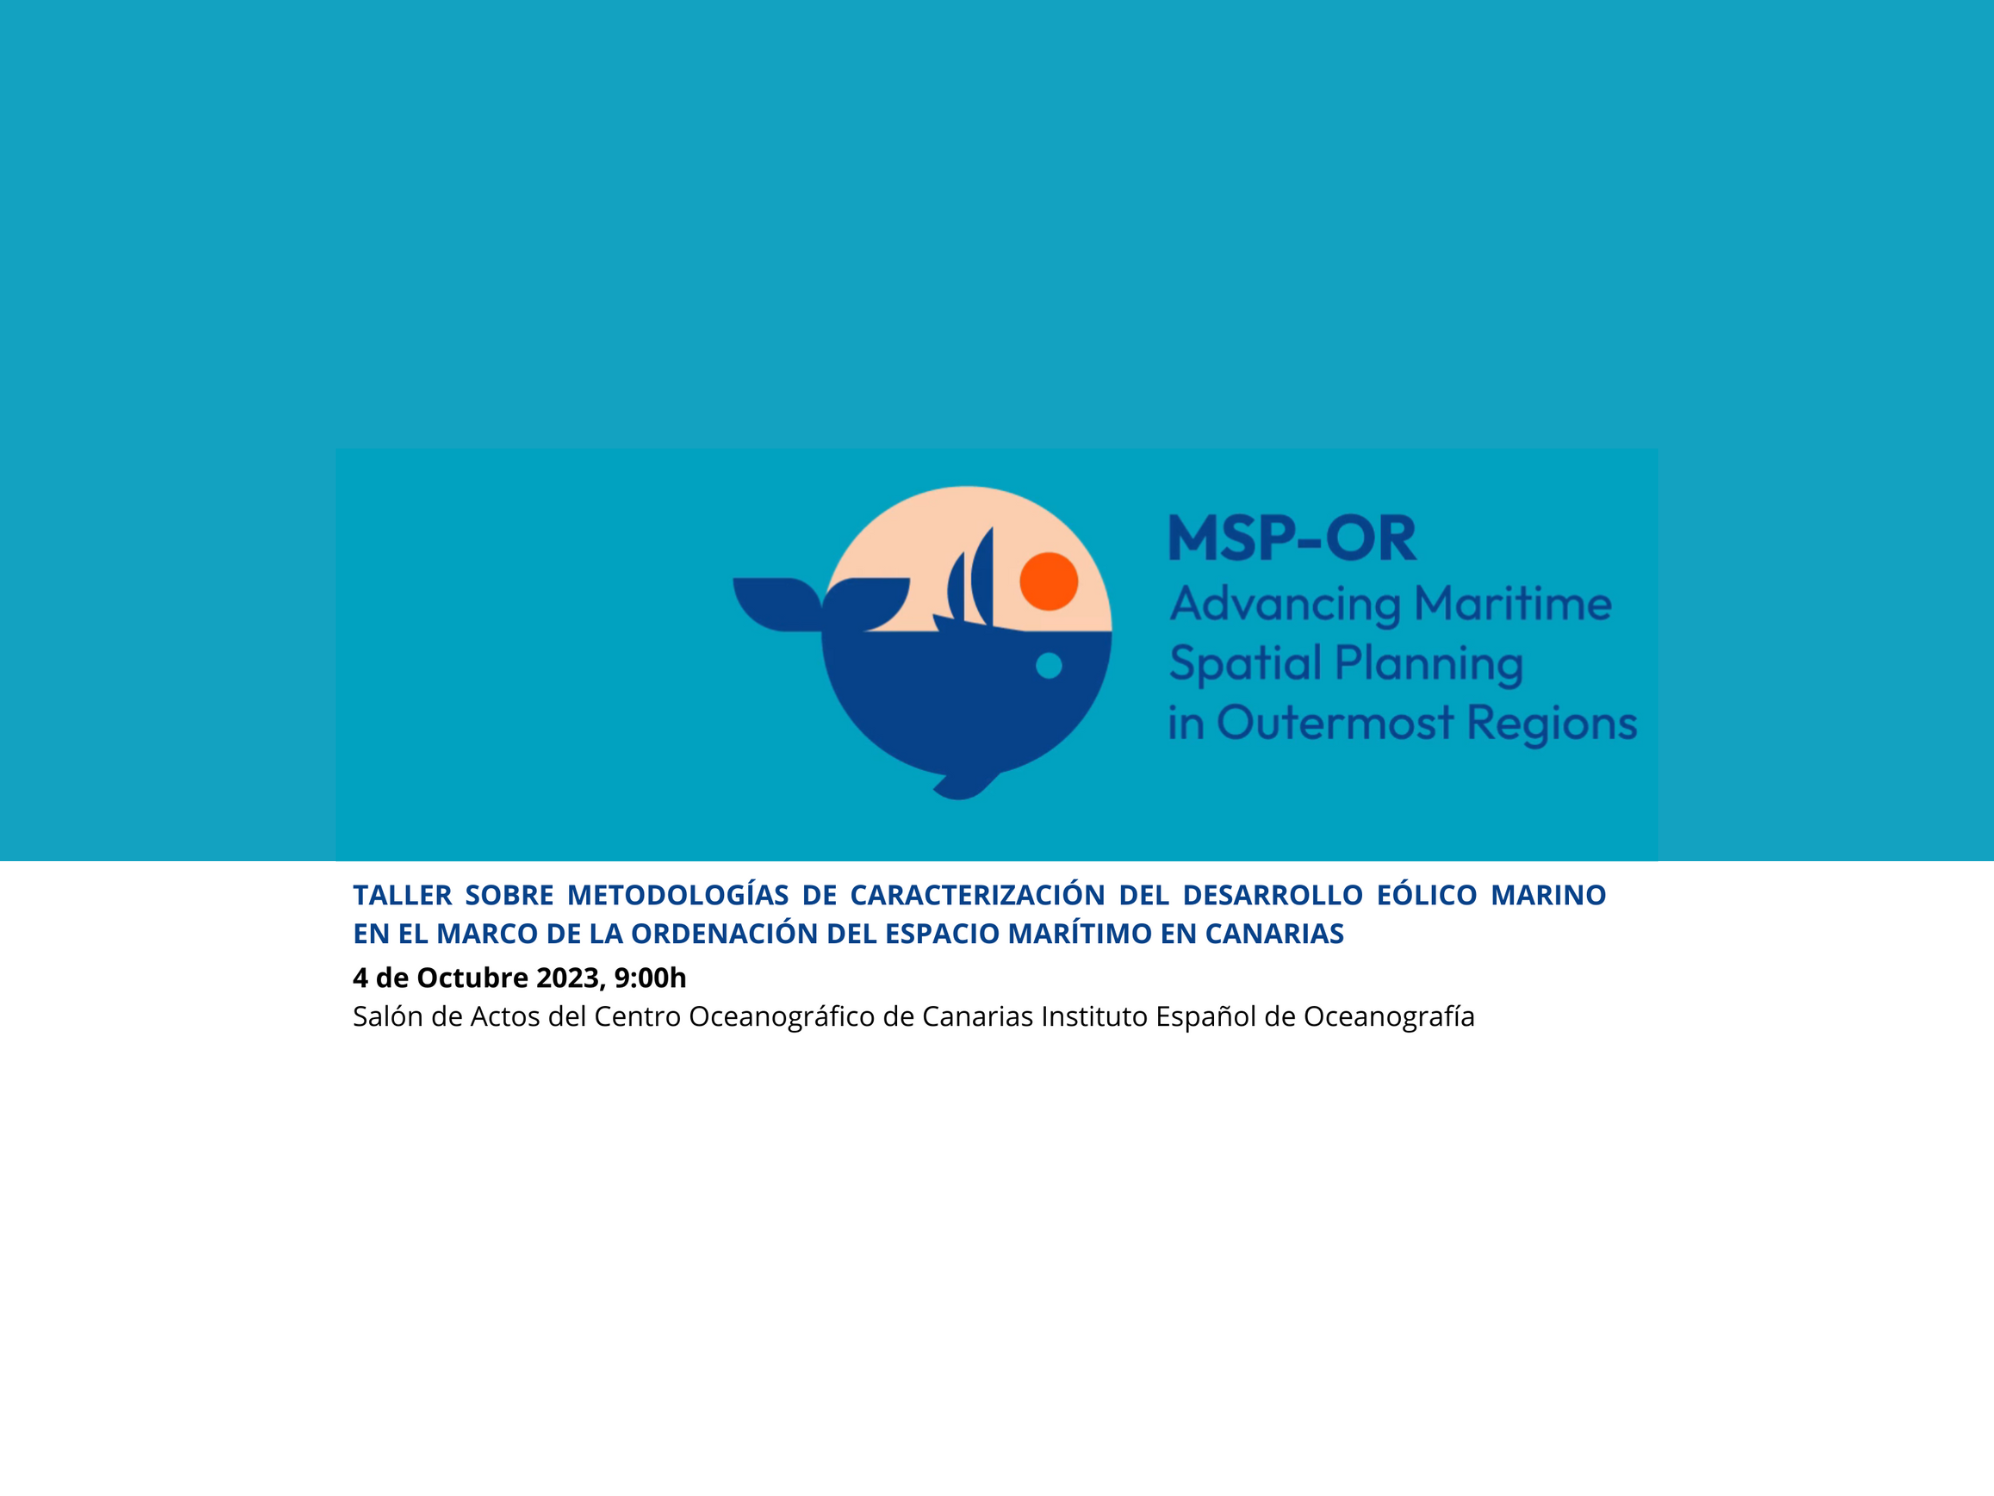 Workshop on methodologies for the characterization of offshore wind development in the framework of maritime spatial planning in the Canaries